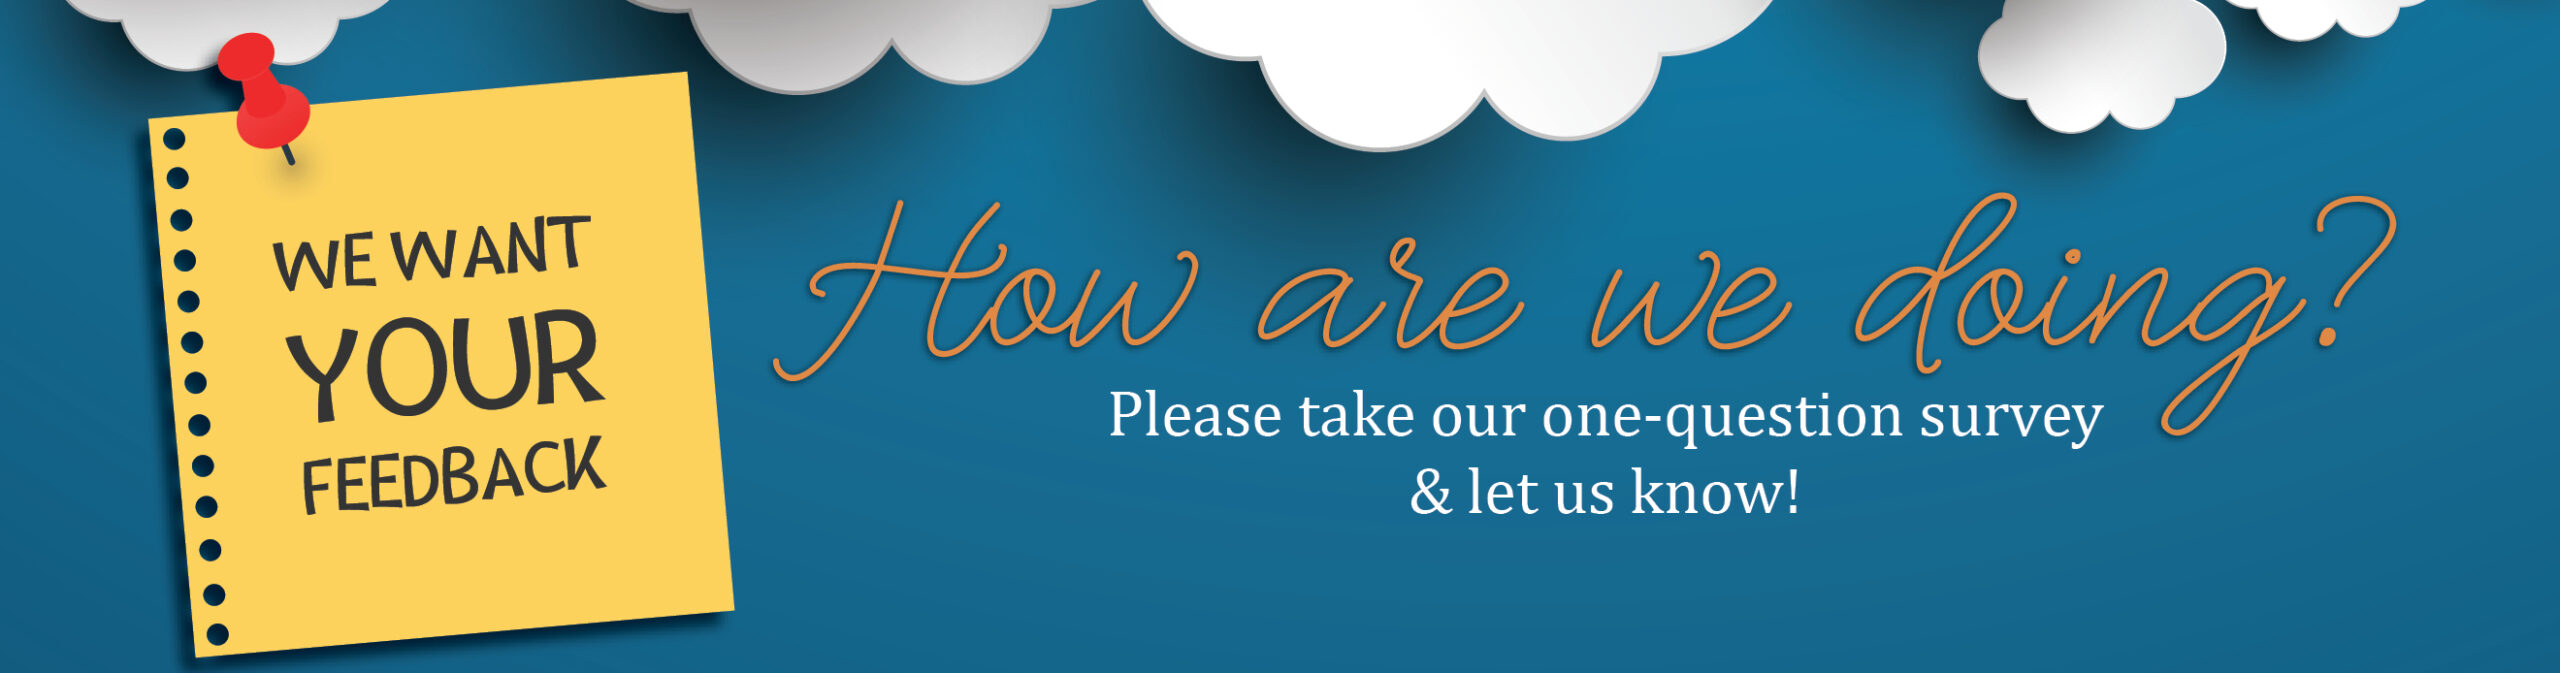 We want your feedback. How are we doing? Please take our one-question survey & let us know!